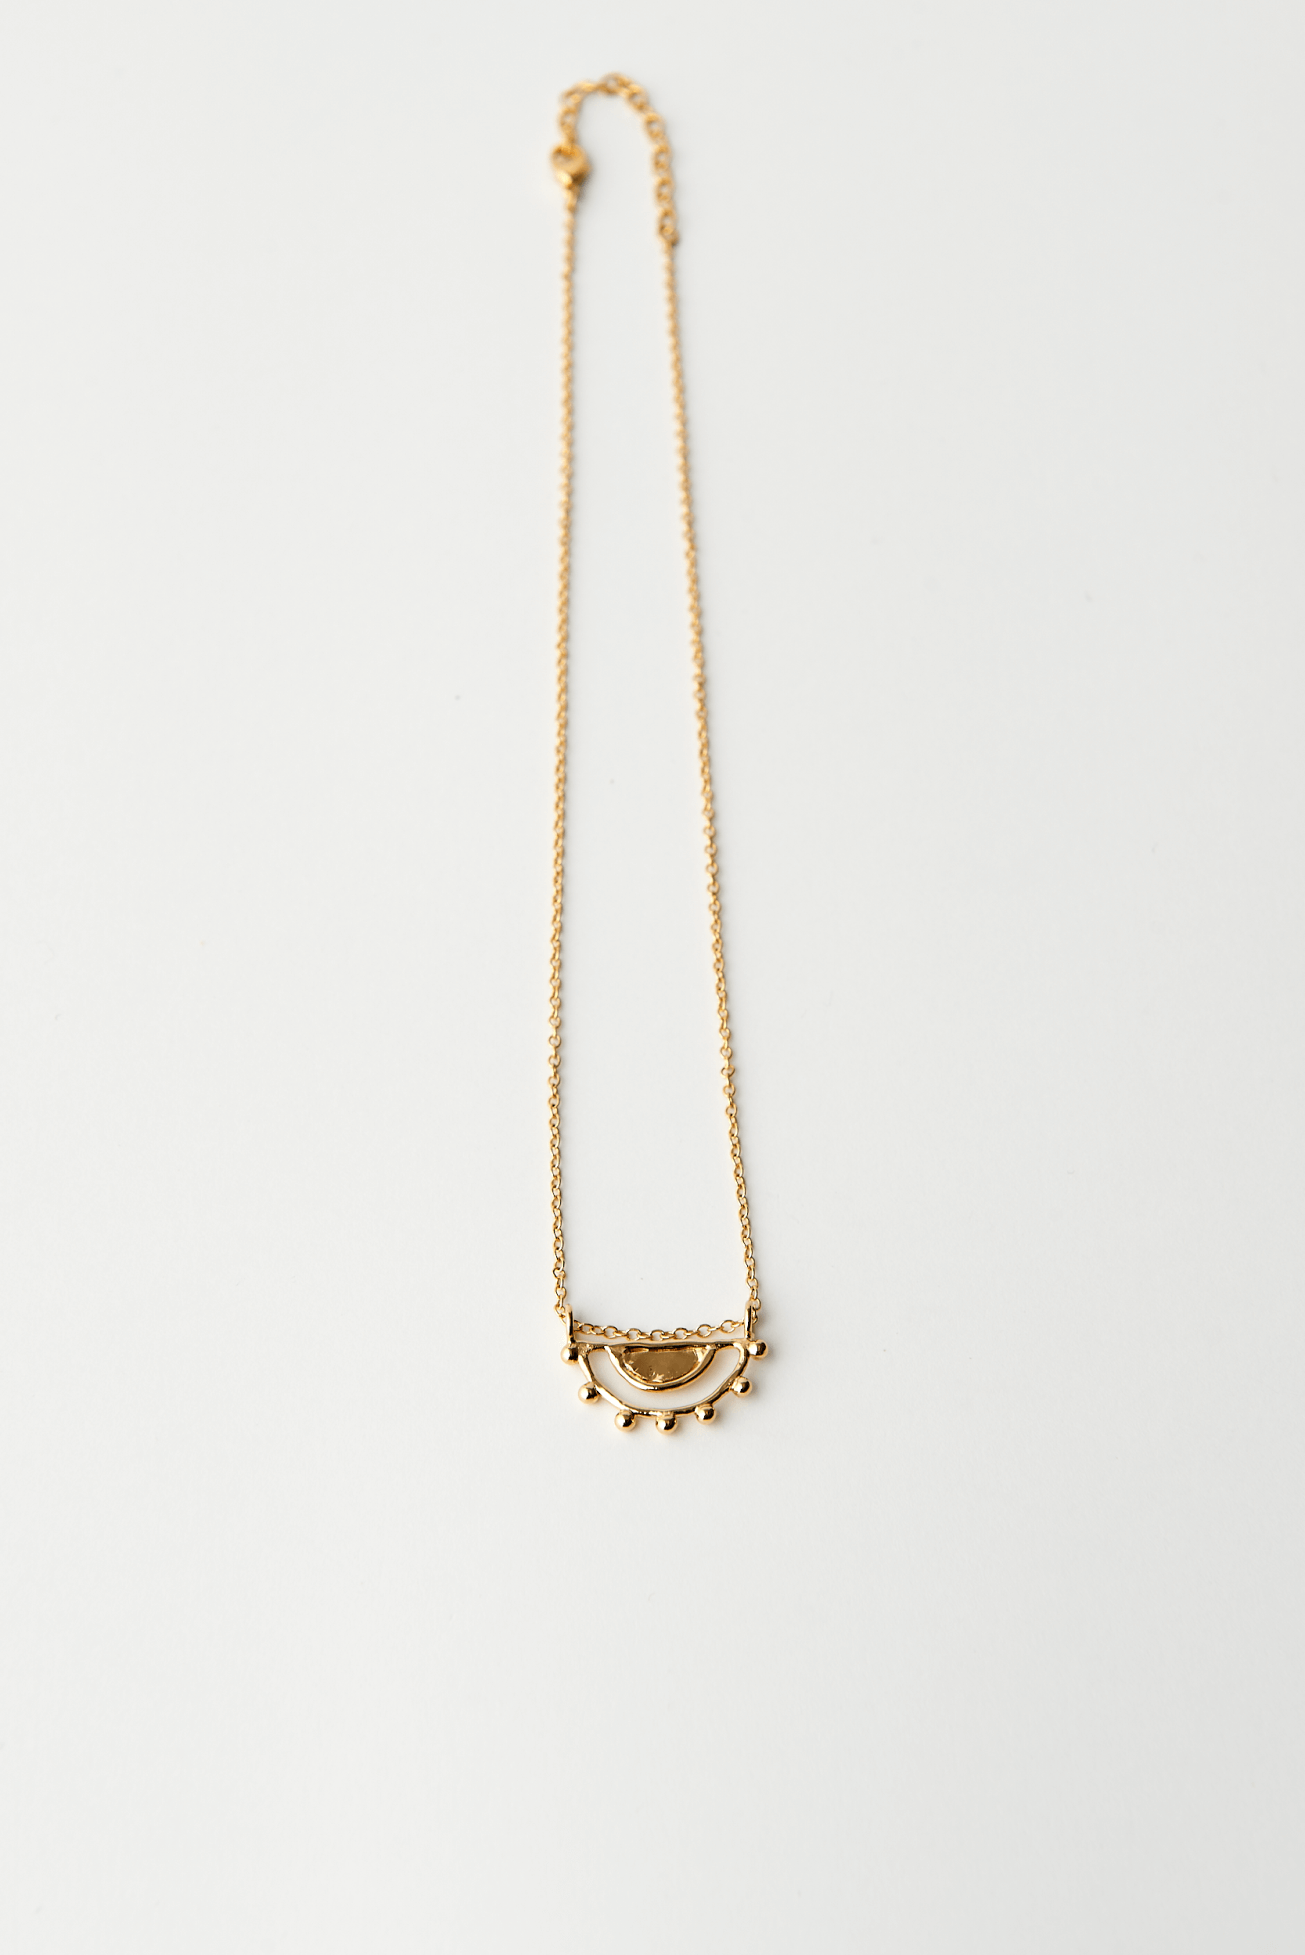 Shop Jicho Pendant and Chain Necklace by We Are NBO on Arrai. Discover stylish, affordable clothing, jewelry, handbags and unique handmade pieces from top Kenyan & African fashion brands prioritising sustainability and quality craftsmanship.